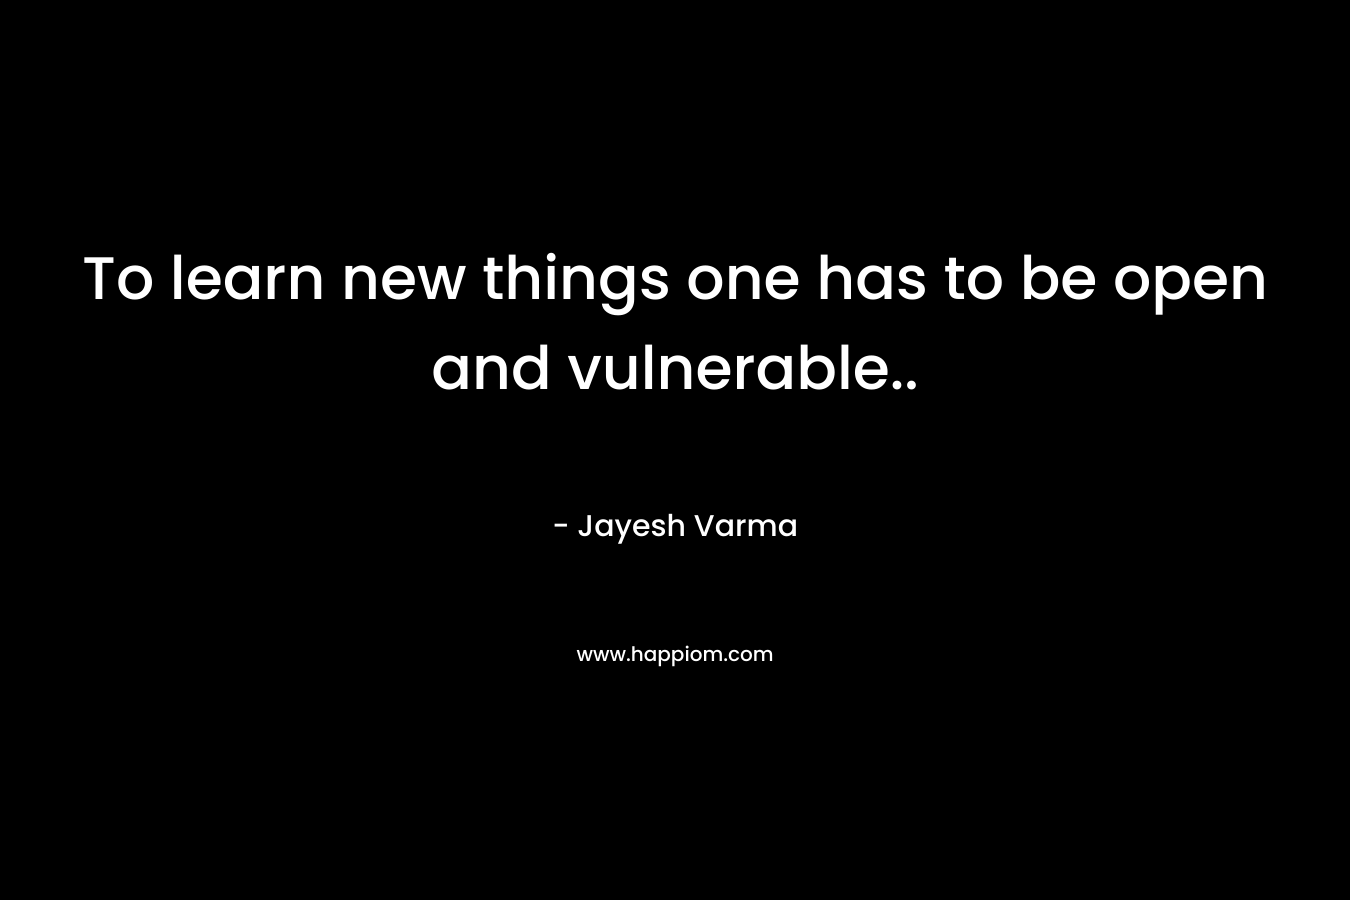 To learn new things one has to be open and vulnerable..